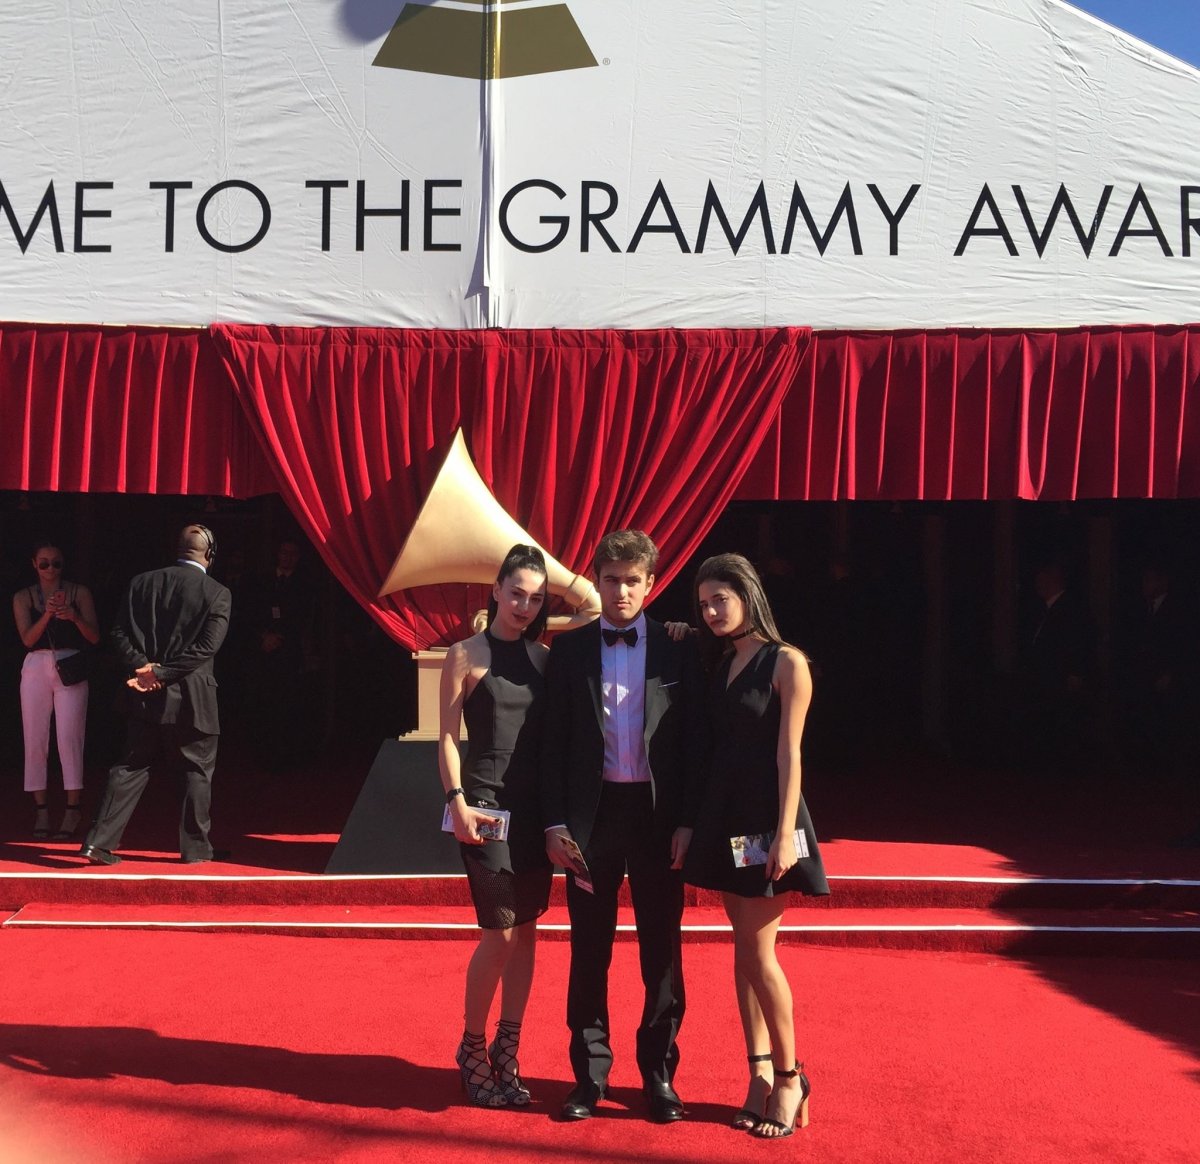 Cynthia Ghosn and her brother and sister are seen here on the Red Carpet at the 2016 Grammy Awards in Los Angeles on Feb. 15, 2016.